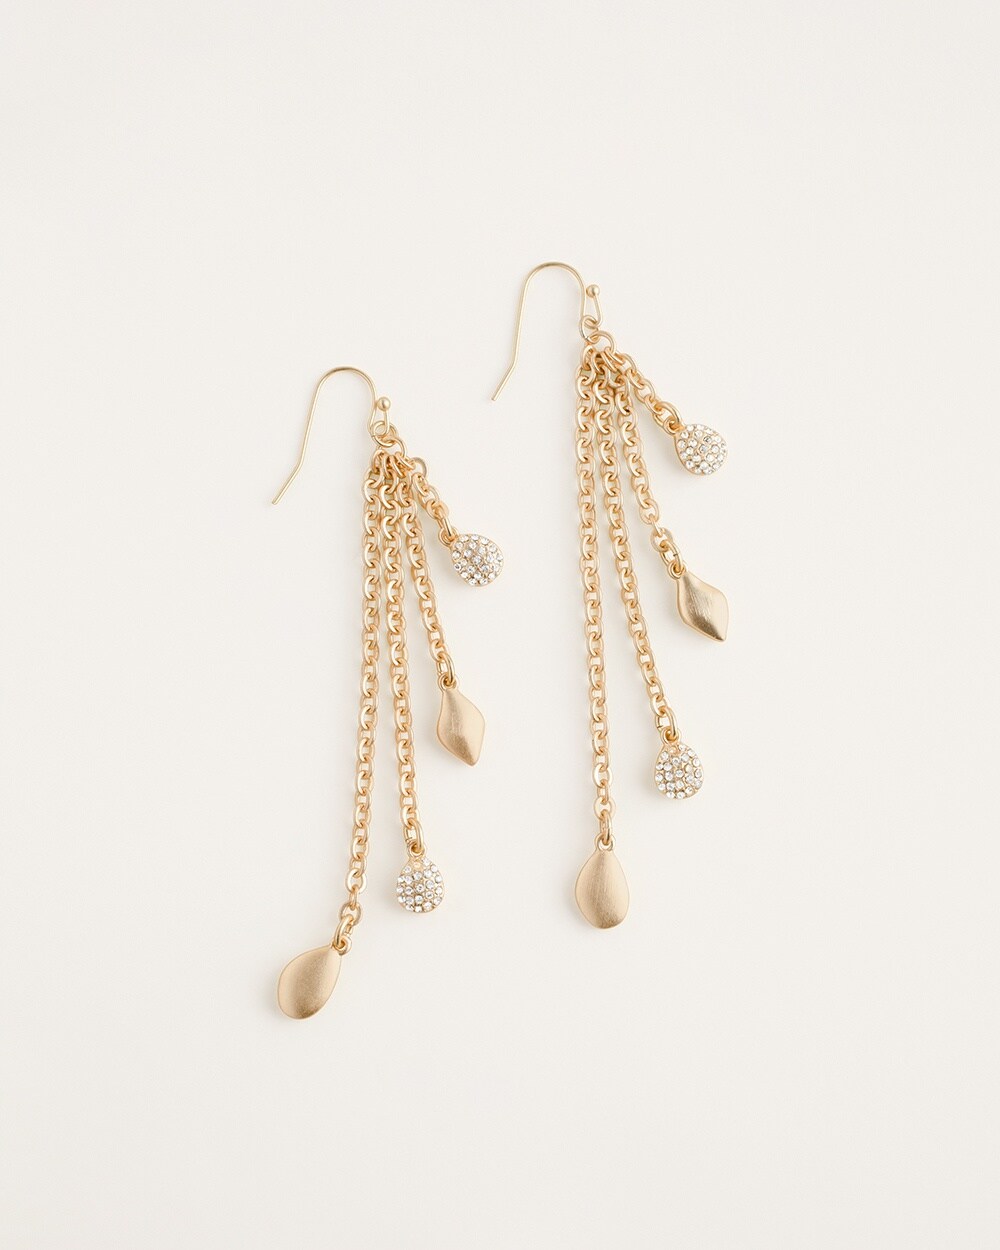 Goldtone and Pave Drop Earrings